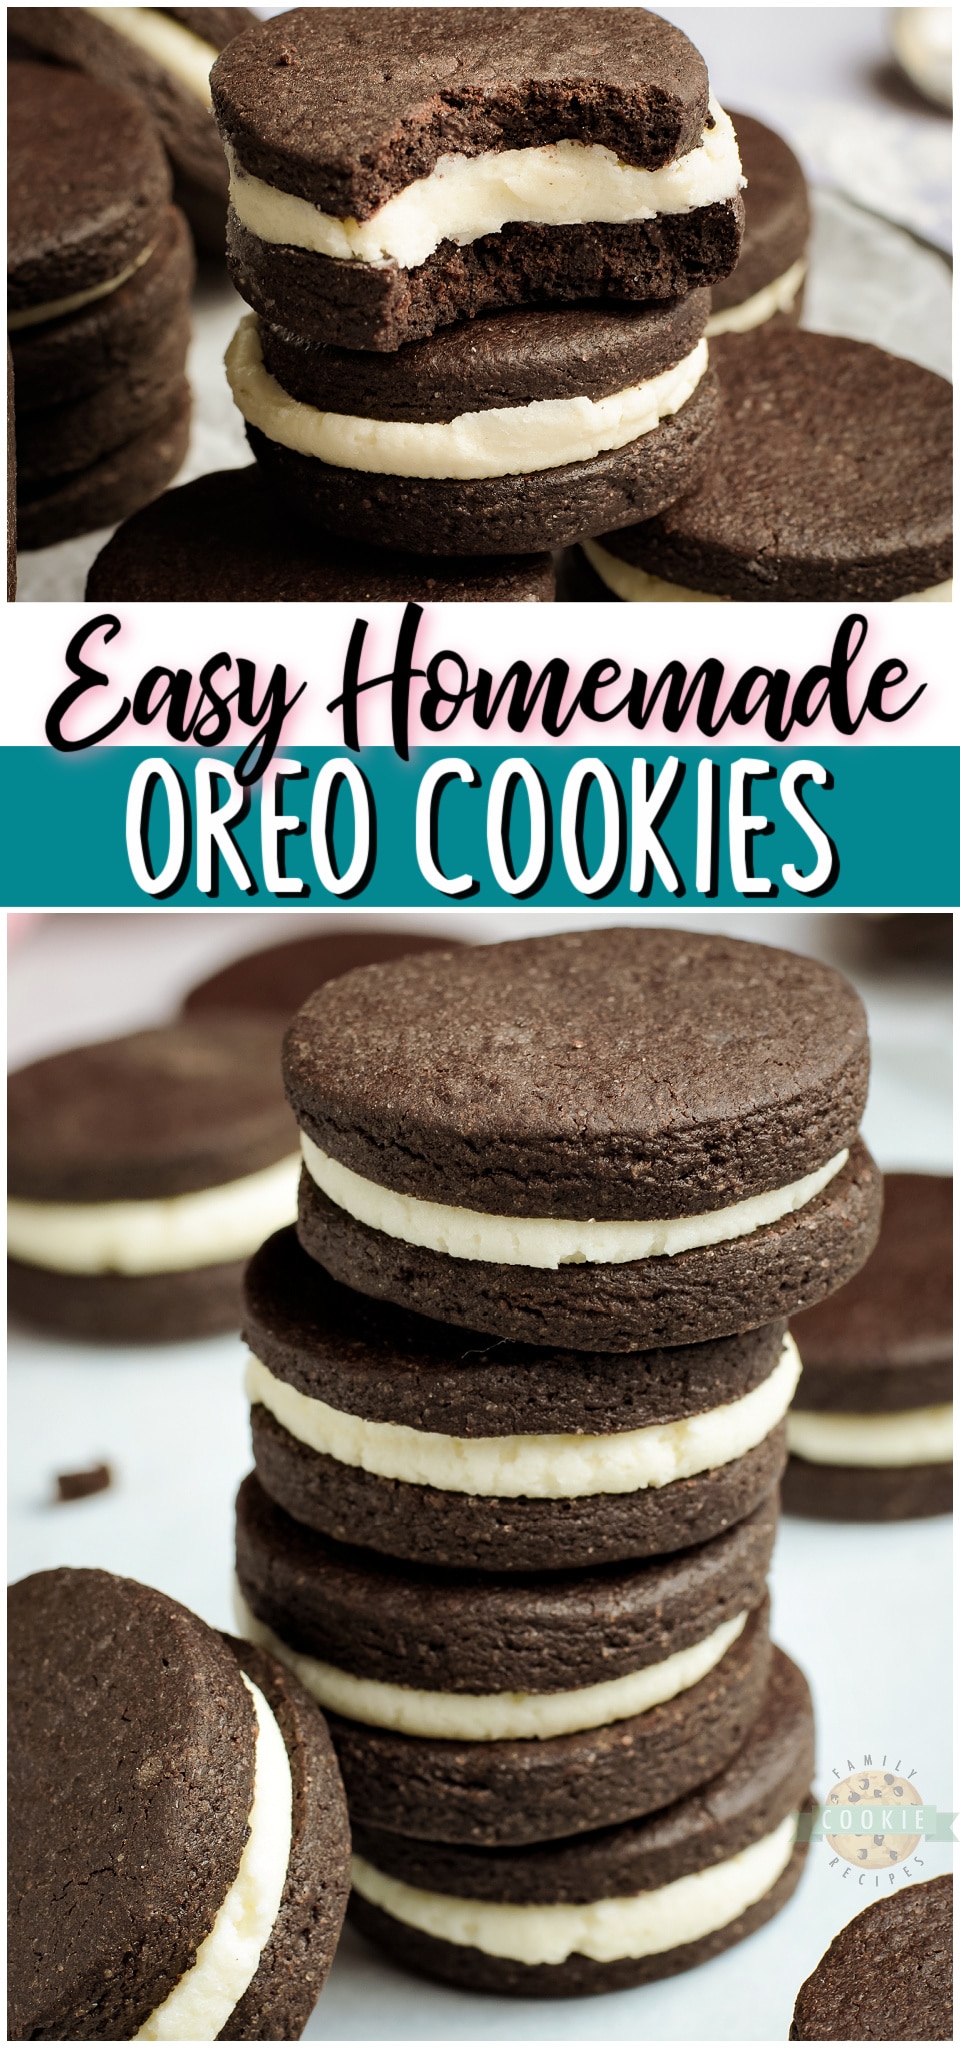 Homemade Oreo Cookies recipe for anyone who loves OREOS! Our Homemade Oreos taste even better with the chocolaty cookies on the outside & buttery vanilla cream on the inside.#cookies #baking #dessert #OREO #easyrecipe from FAMILY COOKIE RECIPES via @buttergirls